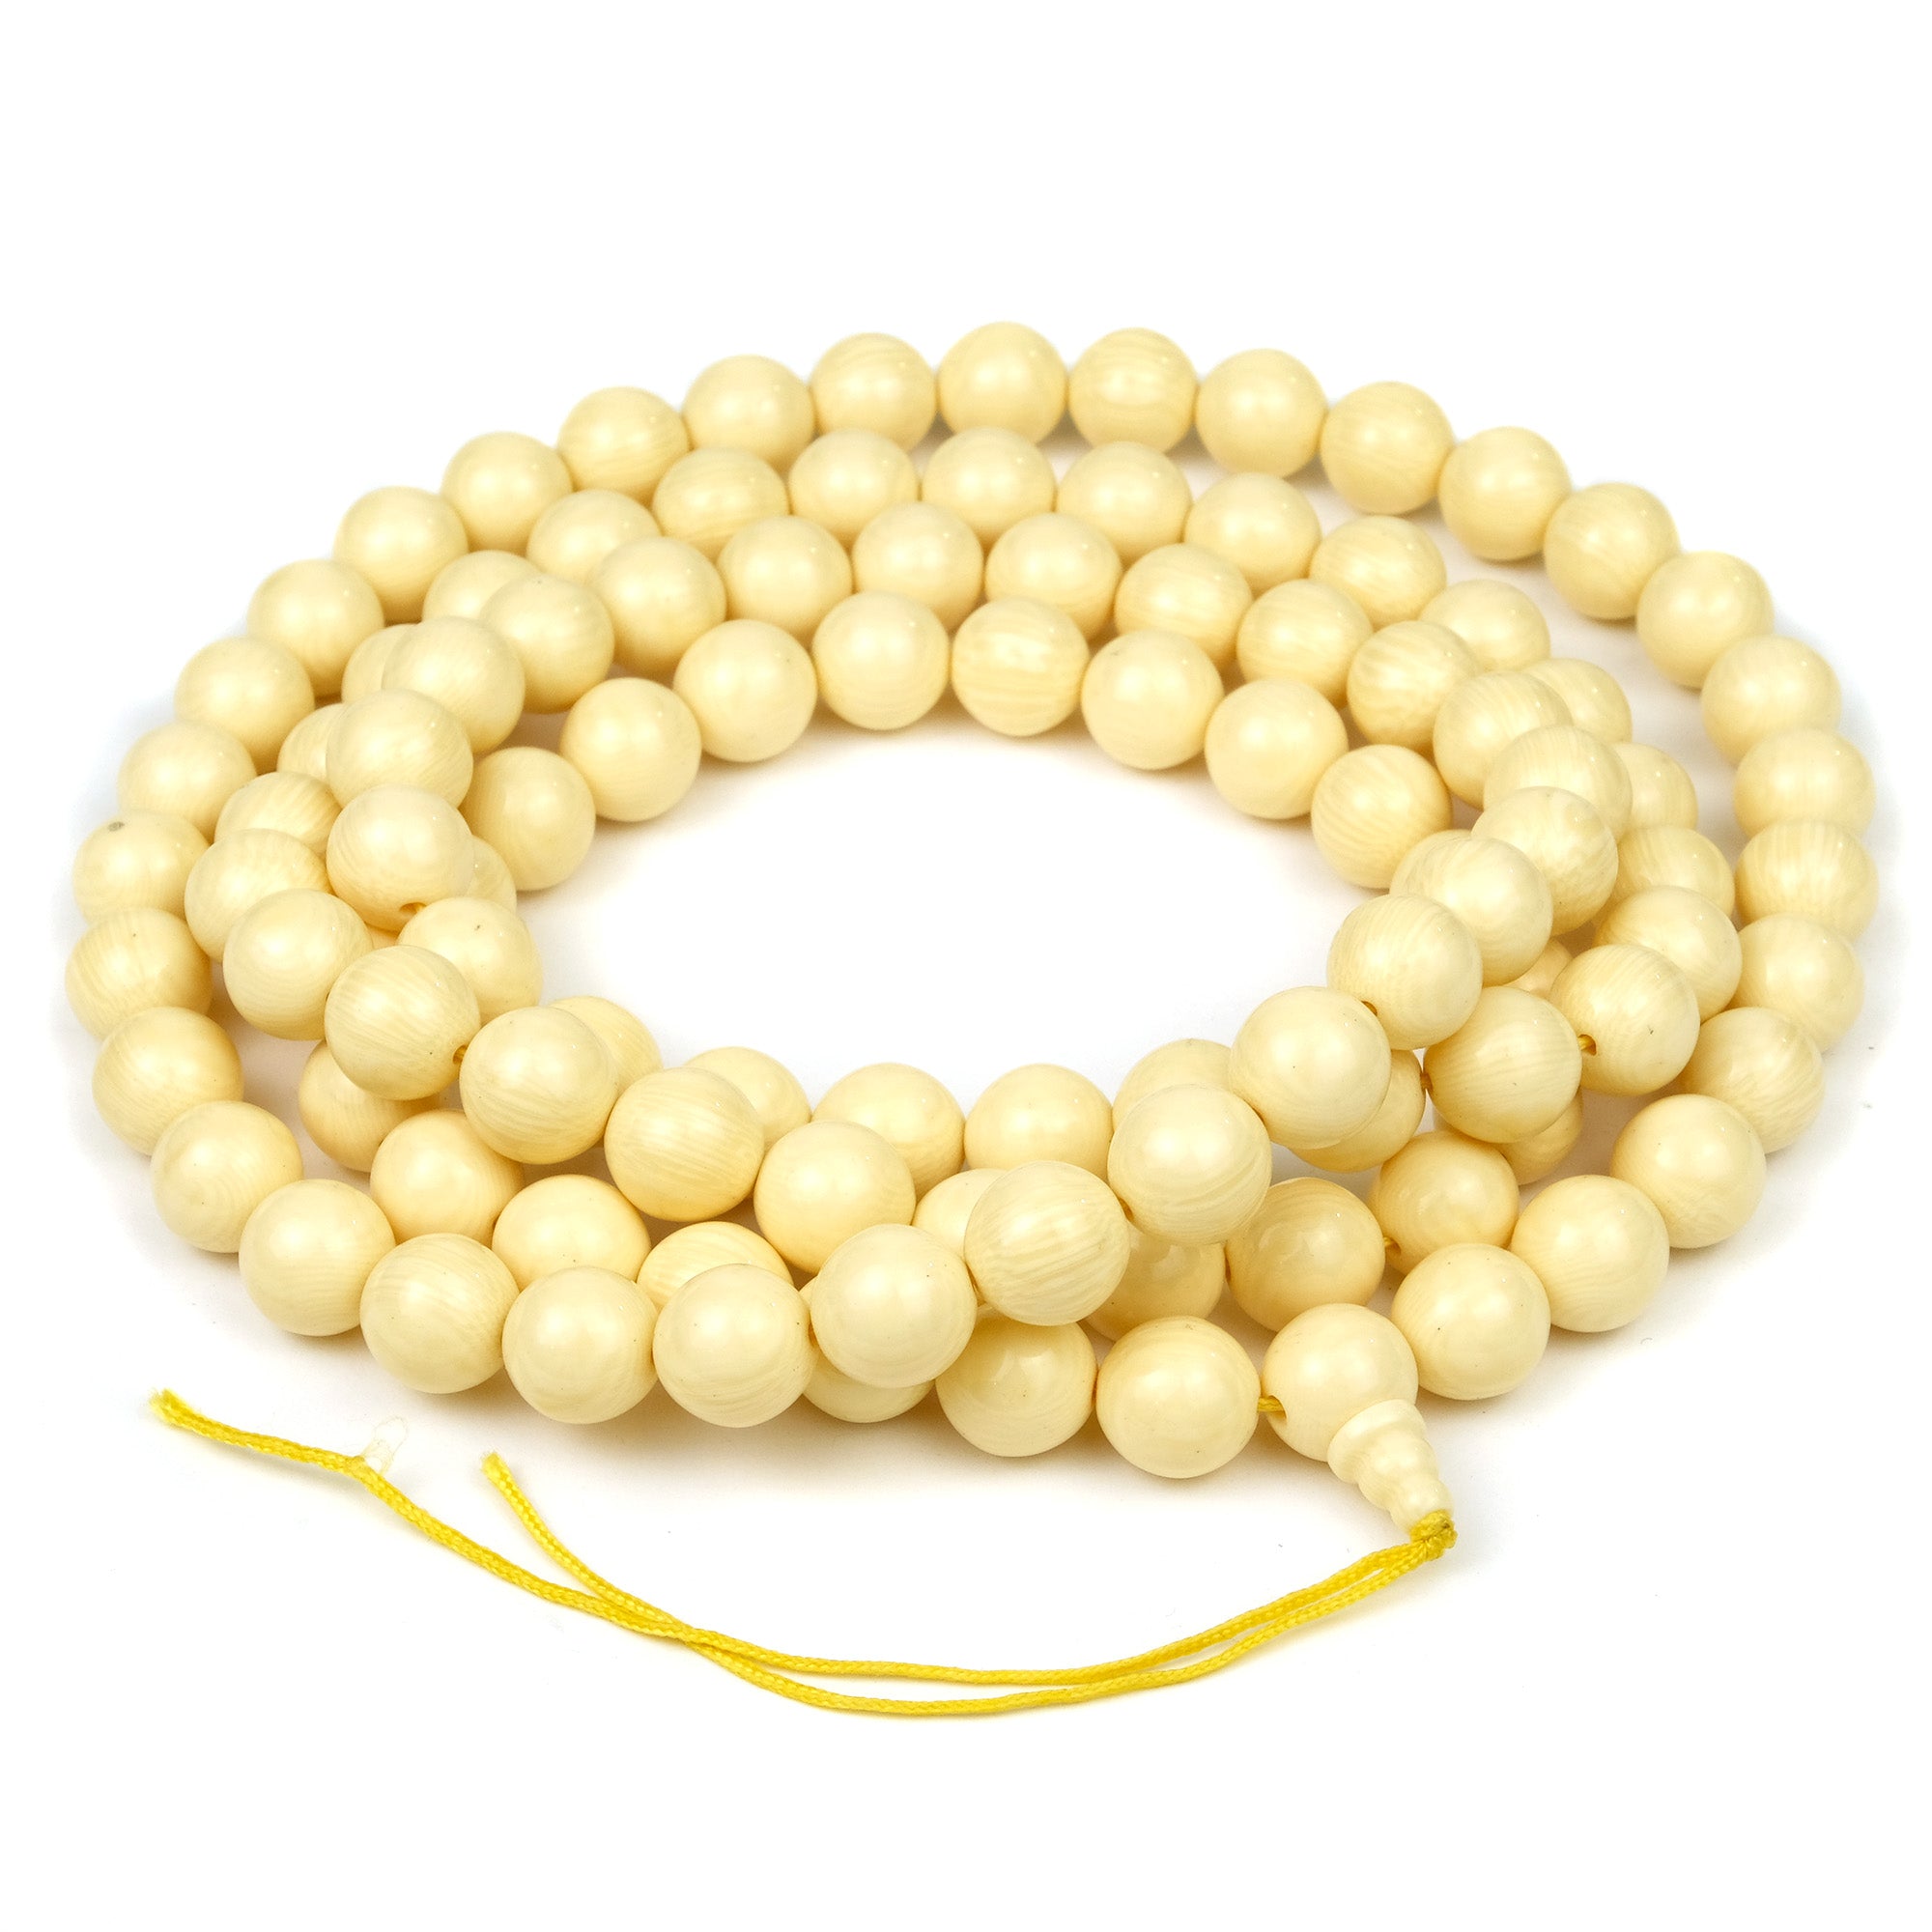 Faux Amber Resin Mala 14mm – Beads of Paradise